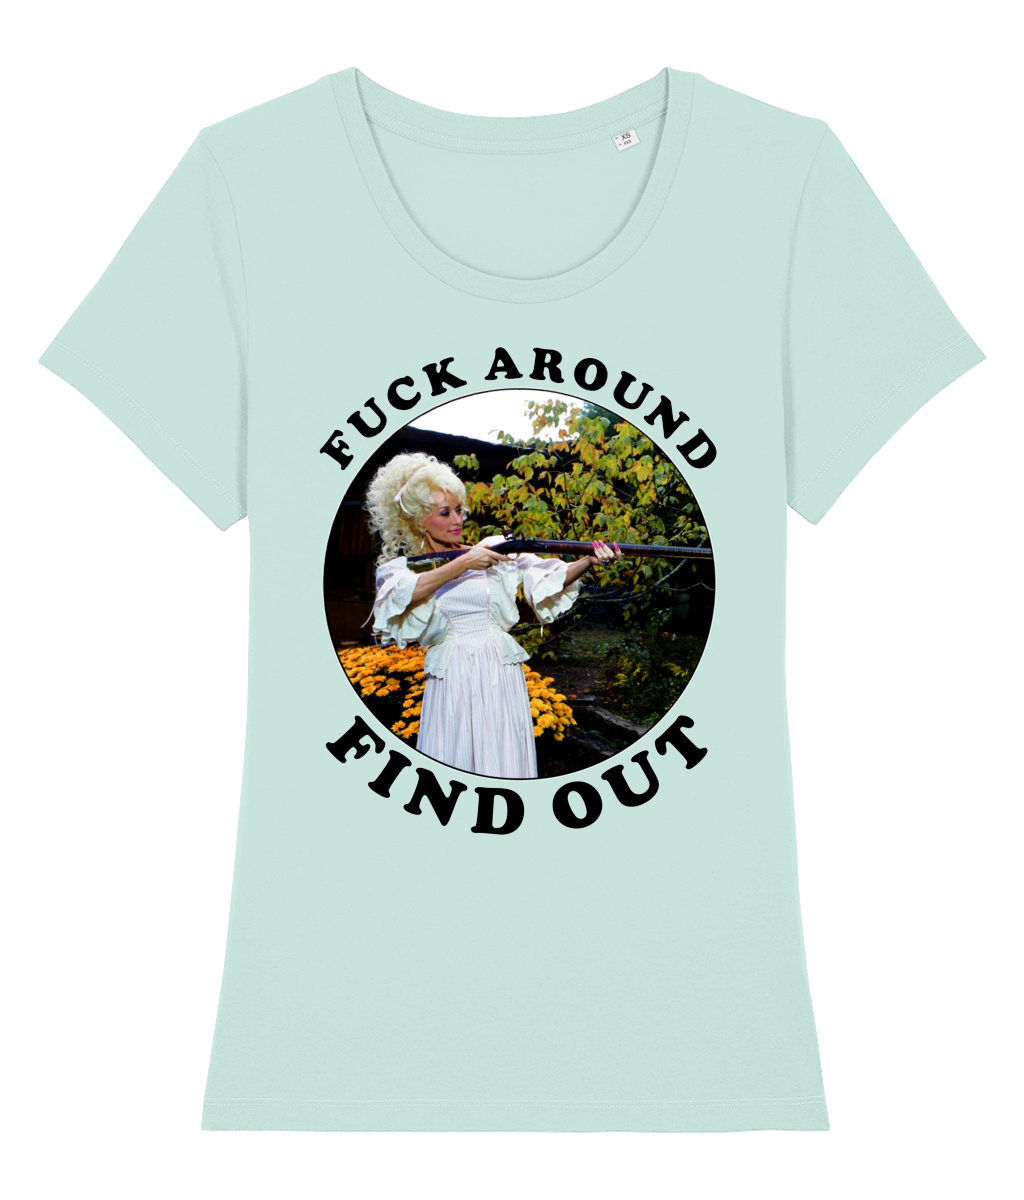 Dolly Parton - F**k Around Find Out - Black Text - Women's T Shirt